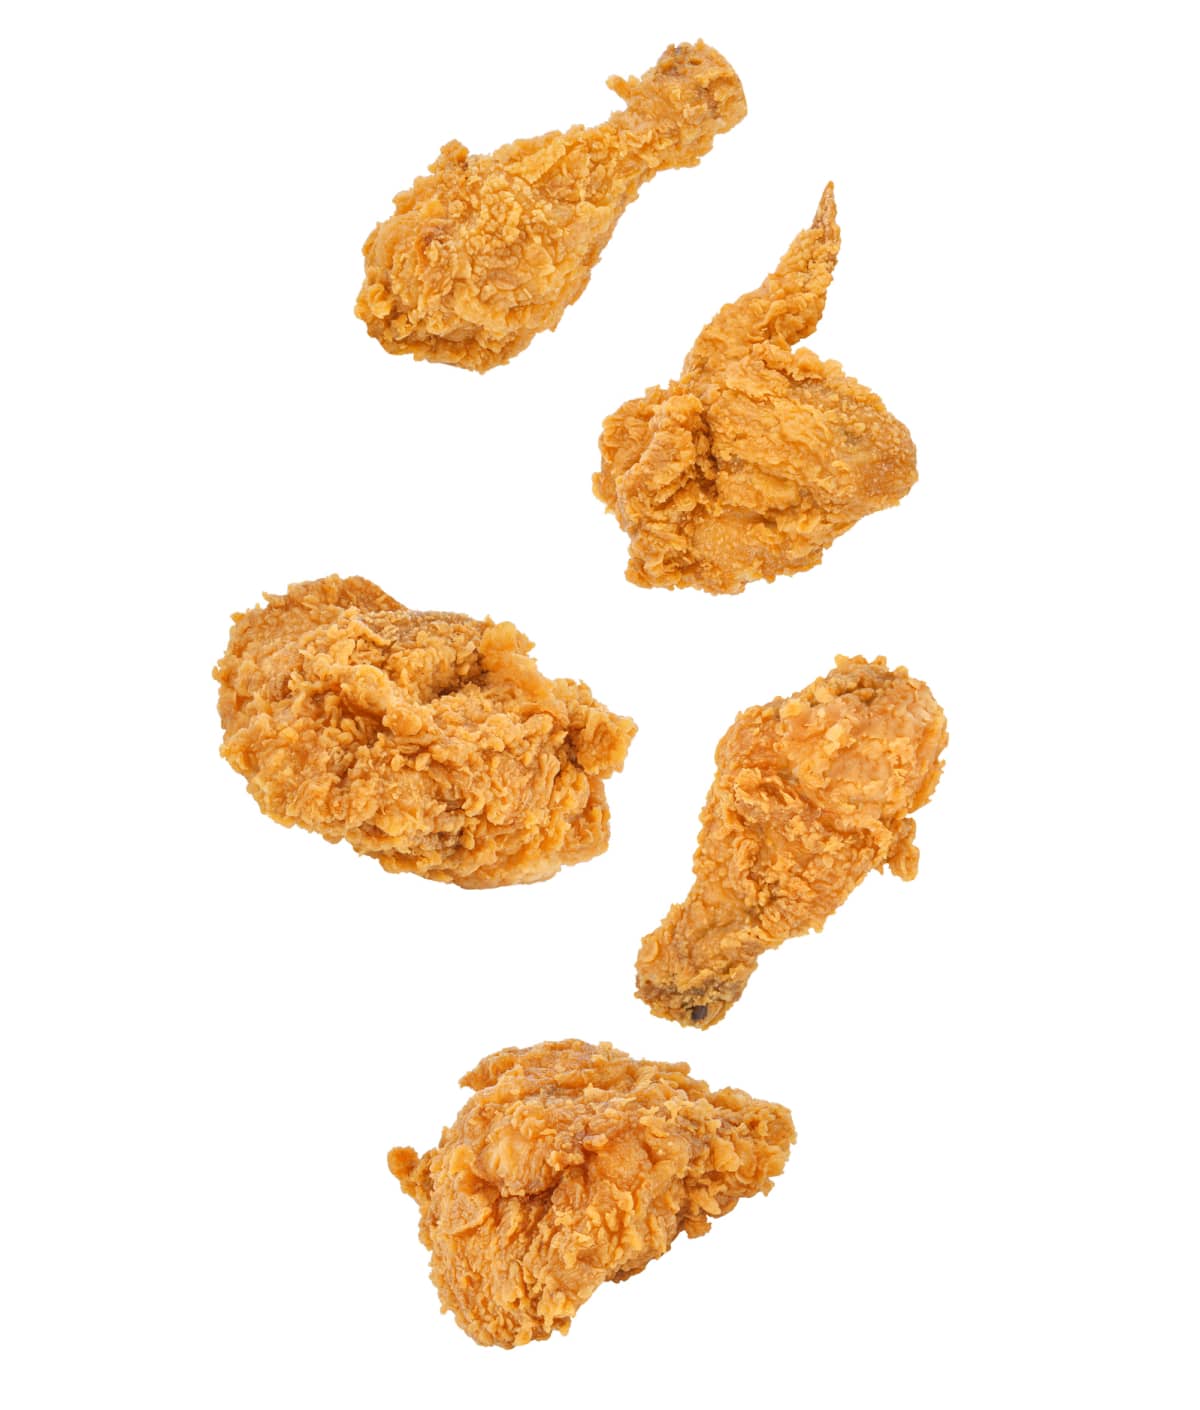 Fried chicken falling in the air isolated on white background.